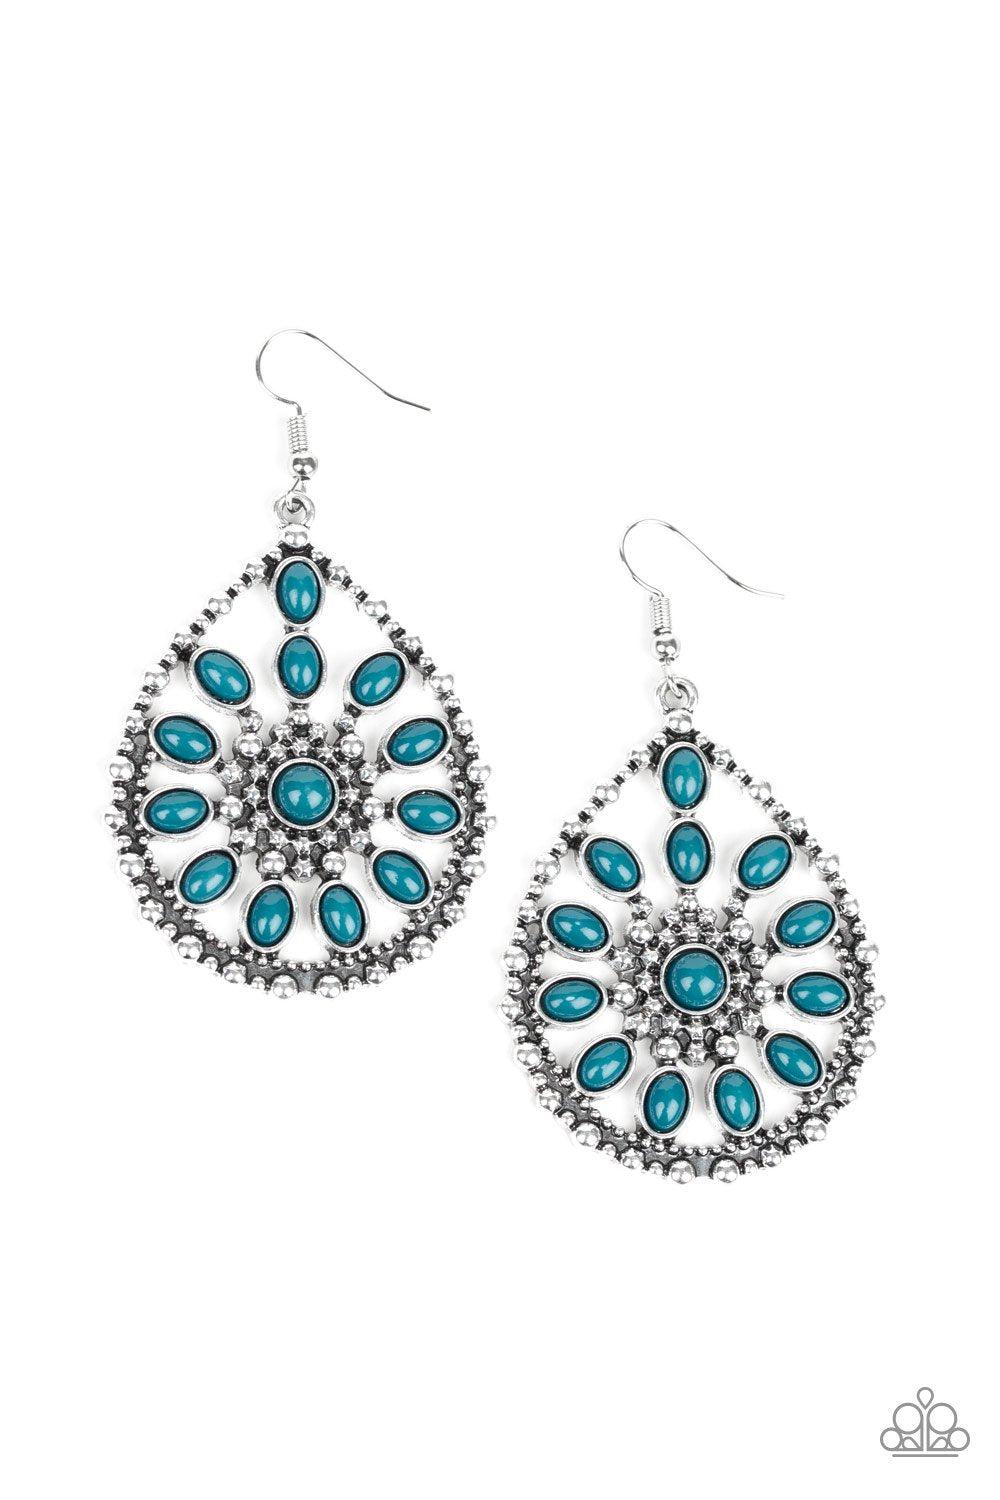 Free To Roam Blue Earrings - Paparazzi Accessories - lightbox -CarasShop.com - $5 Jewelry by Cara Jewels